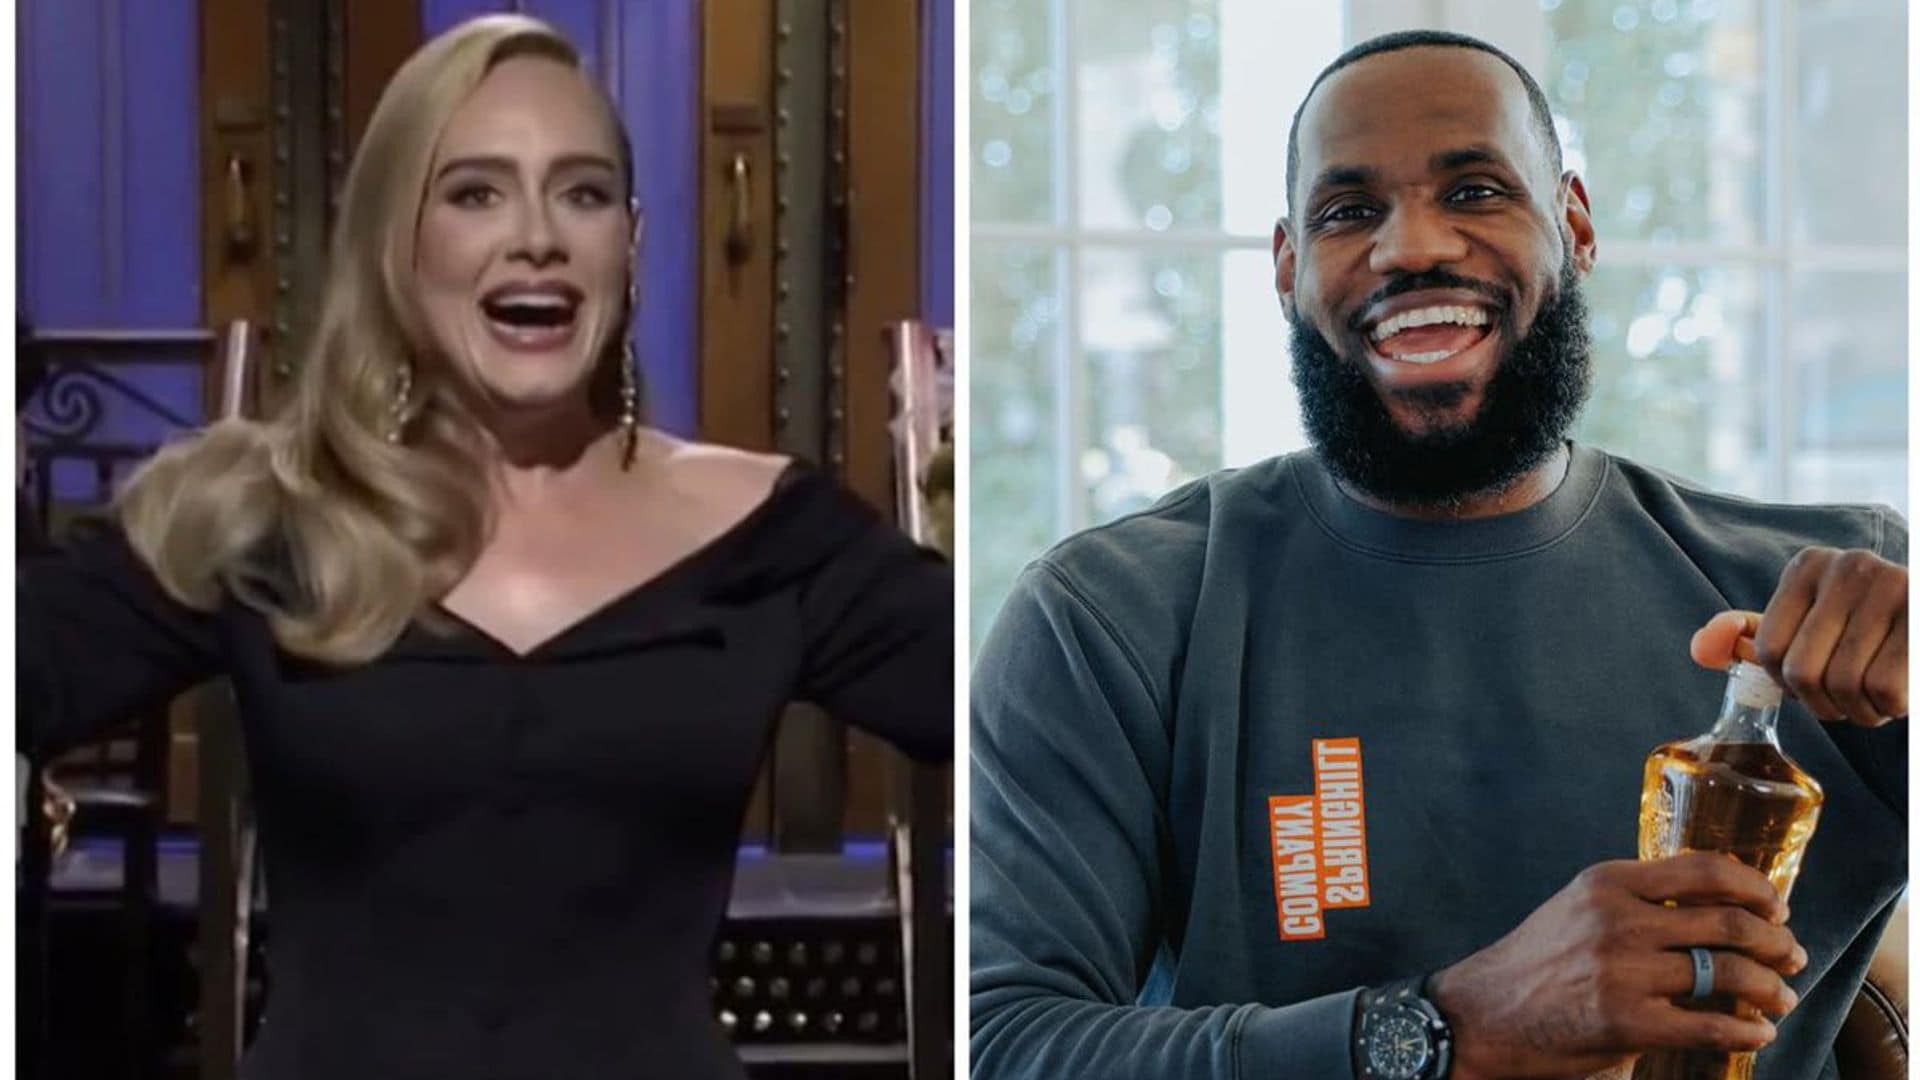 Watch Adele and LeBron James dancing Dominican music at Anthony Davis's wedding